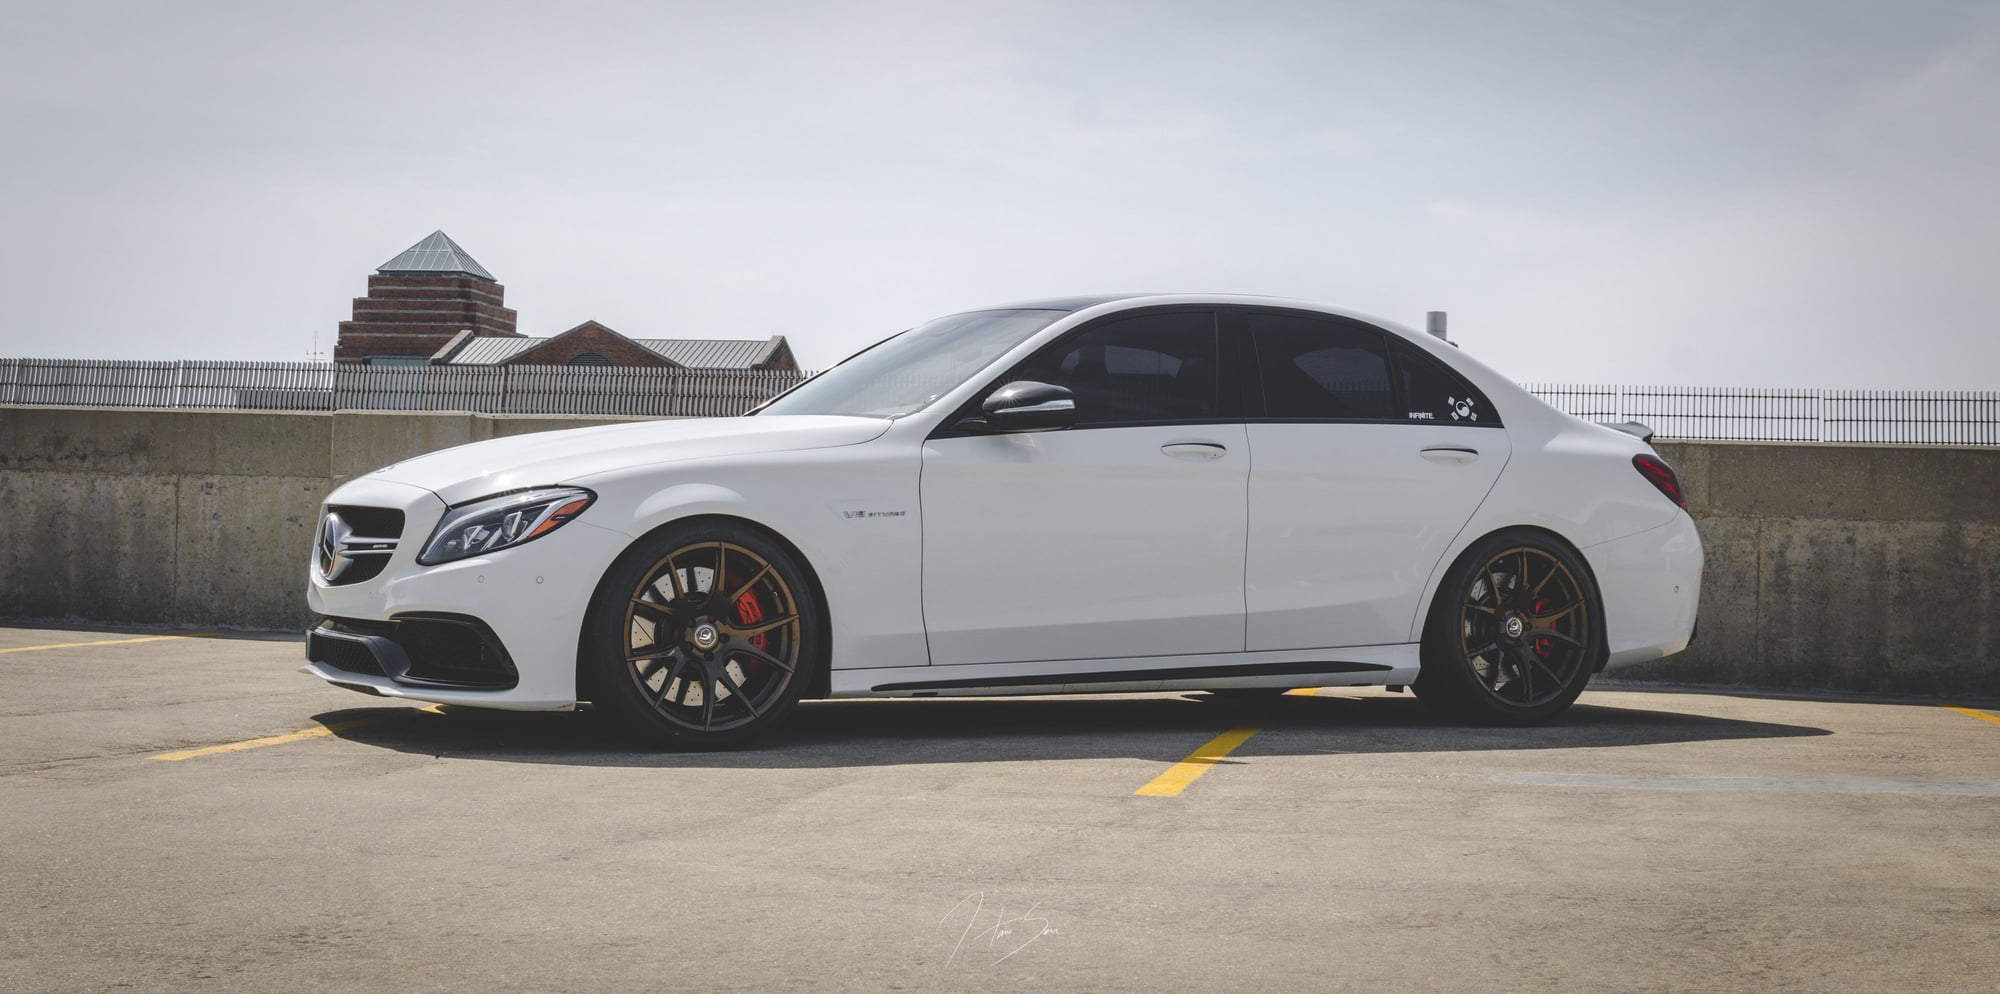 Wheels and Tires/Axles - 19x9.5 & 19x11 Forgestar CF5V - Used - 2015 to 2019 Mercedes-Benz C63 AMG - 2010 to 2013 Mercedes-Benz E63 AMG - 2001 to 2019 Mercedes-Benz S63 AMG - Champaign, IL 61820, United States